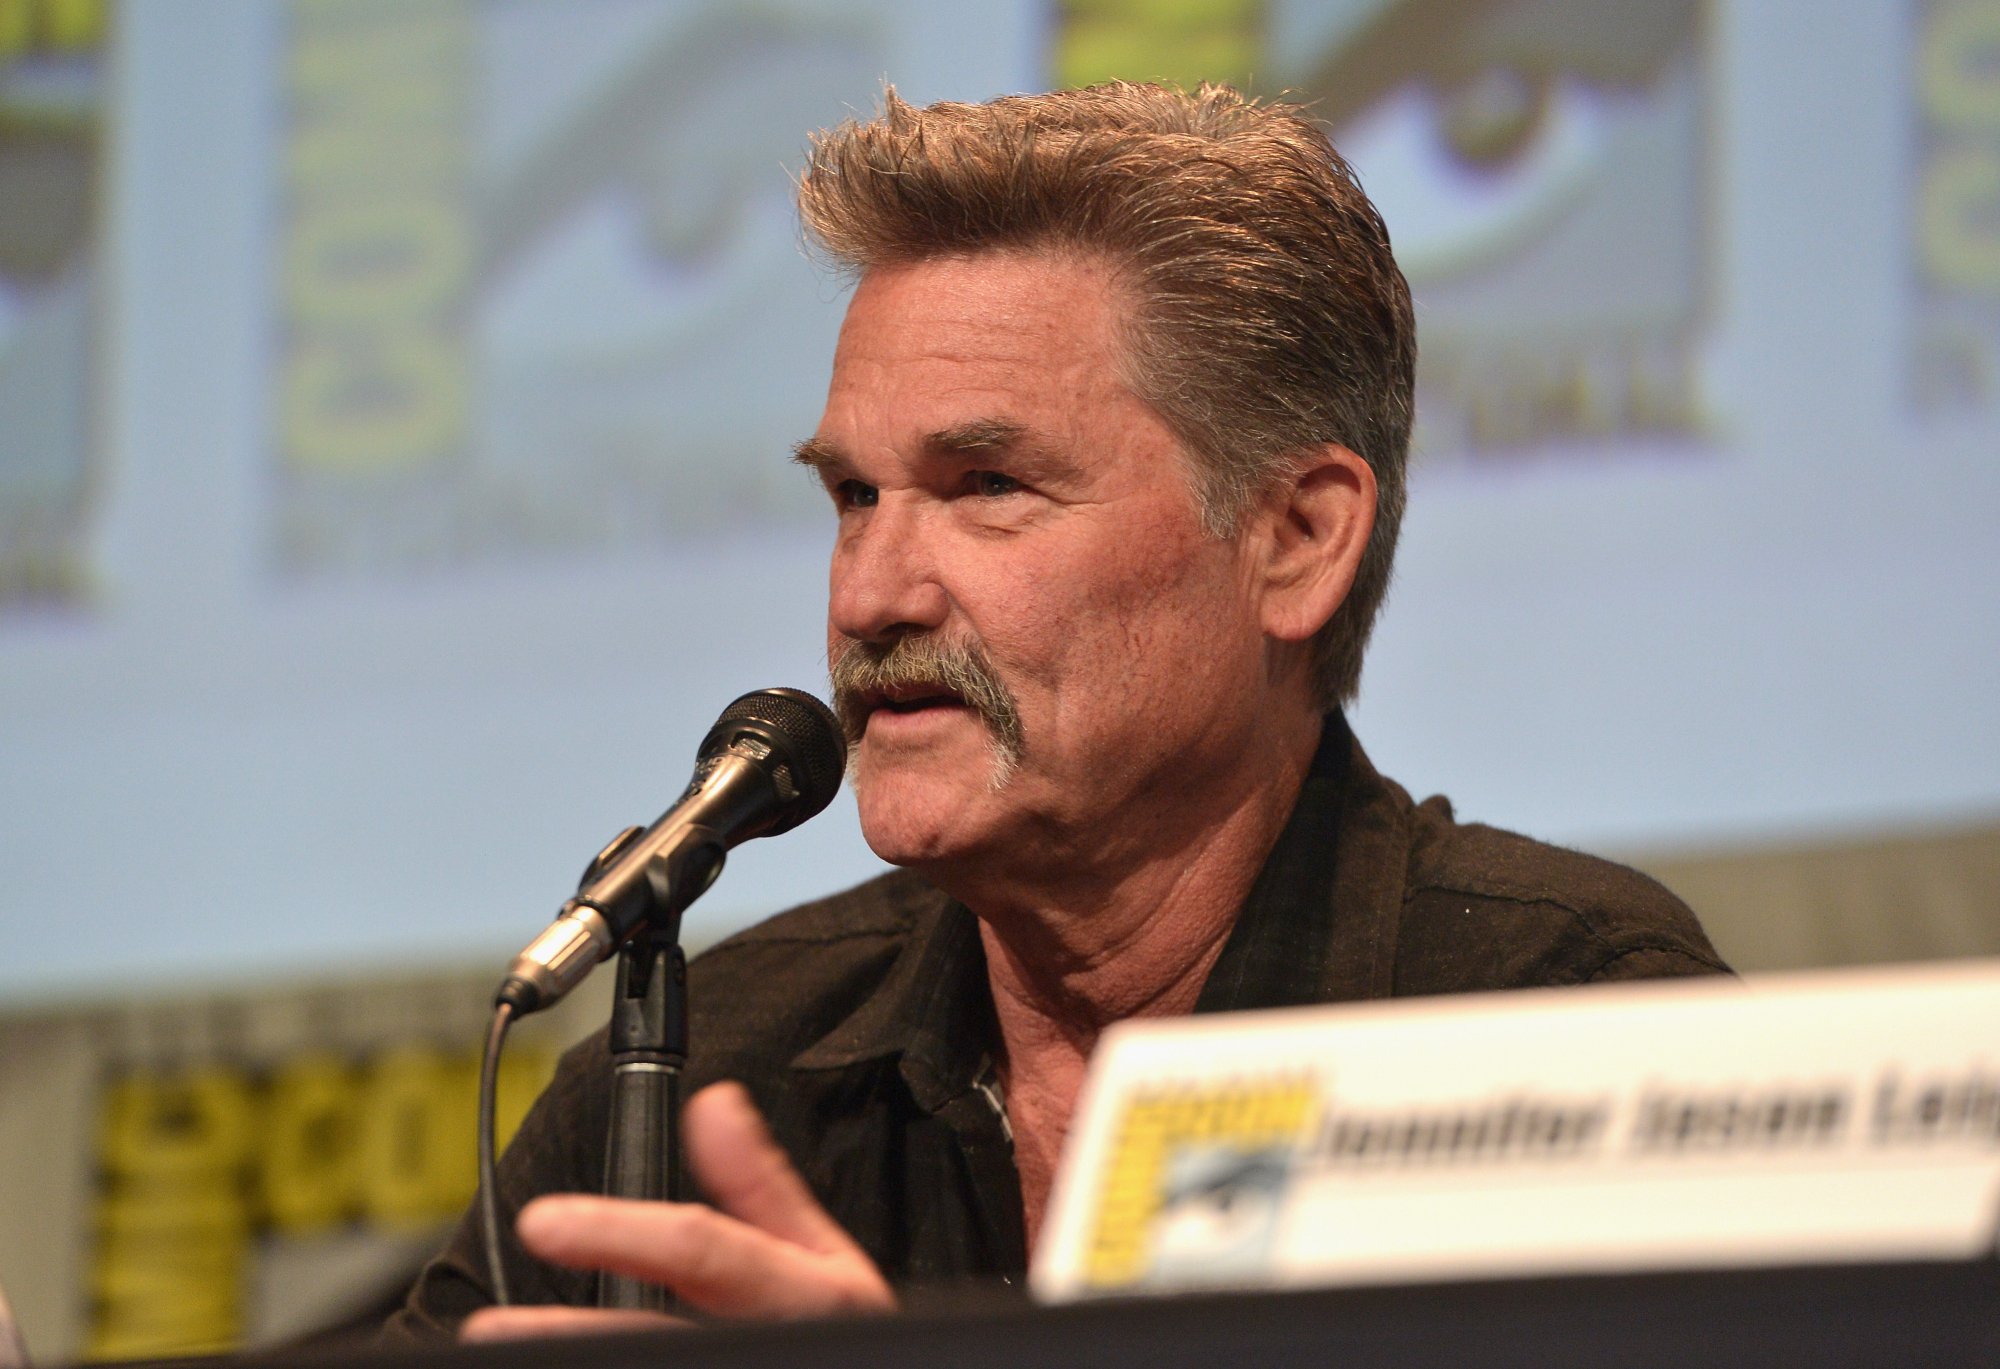 'The Hateful Eight' Kurt Russell talking into a microphone with a name card in front